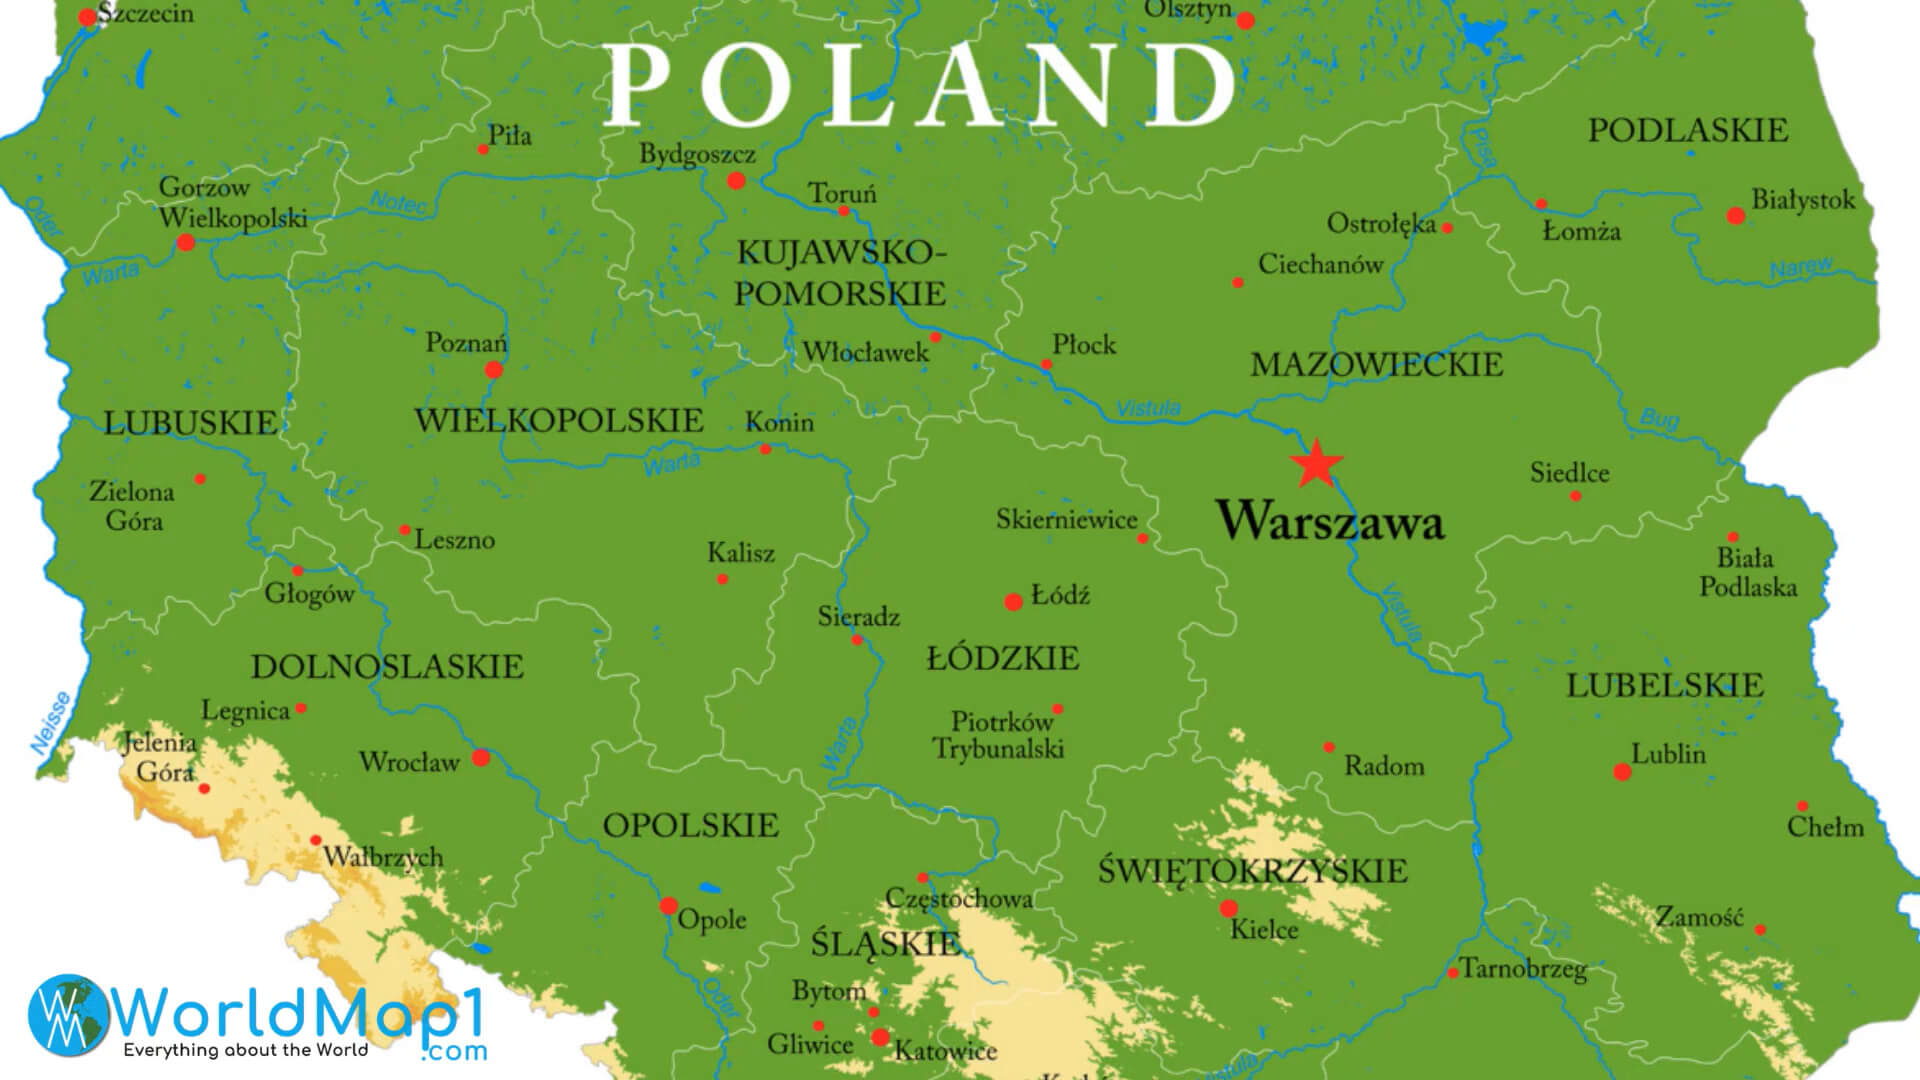 Poland Main Cities Map with Rivers